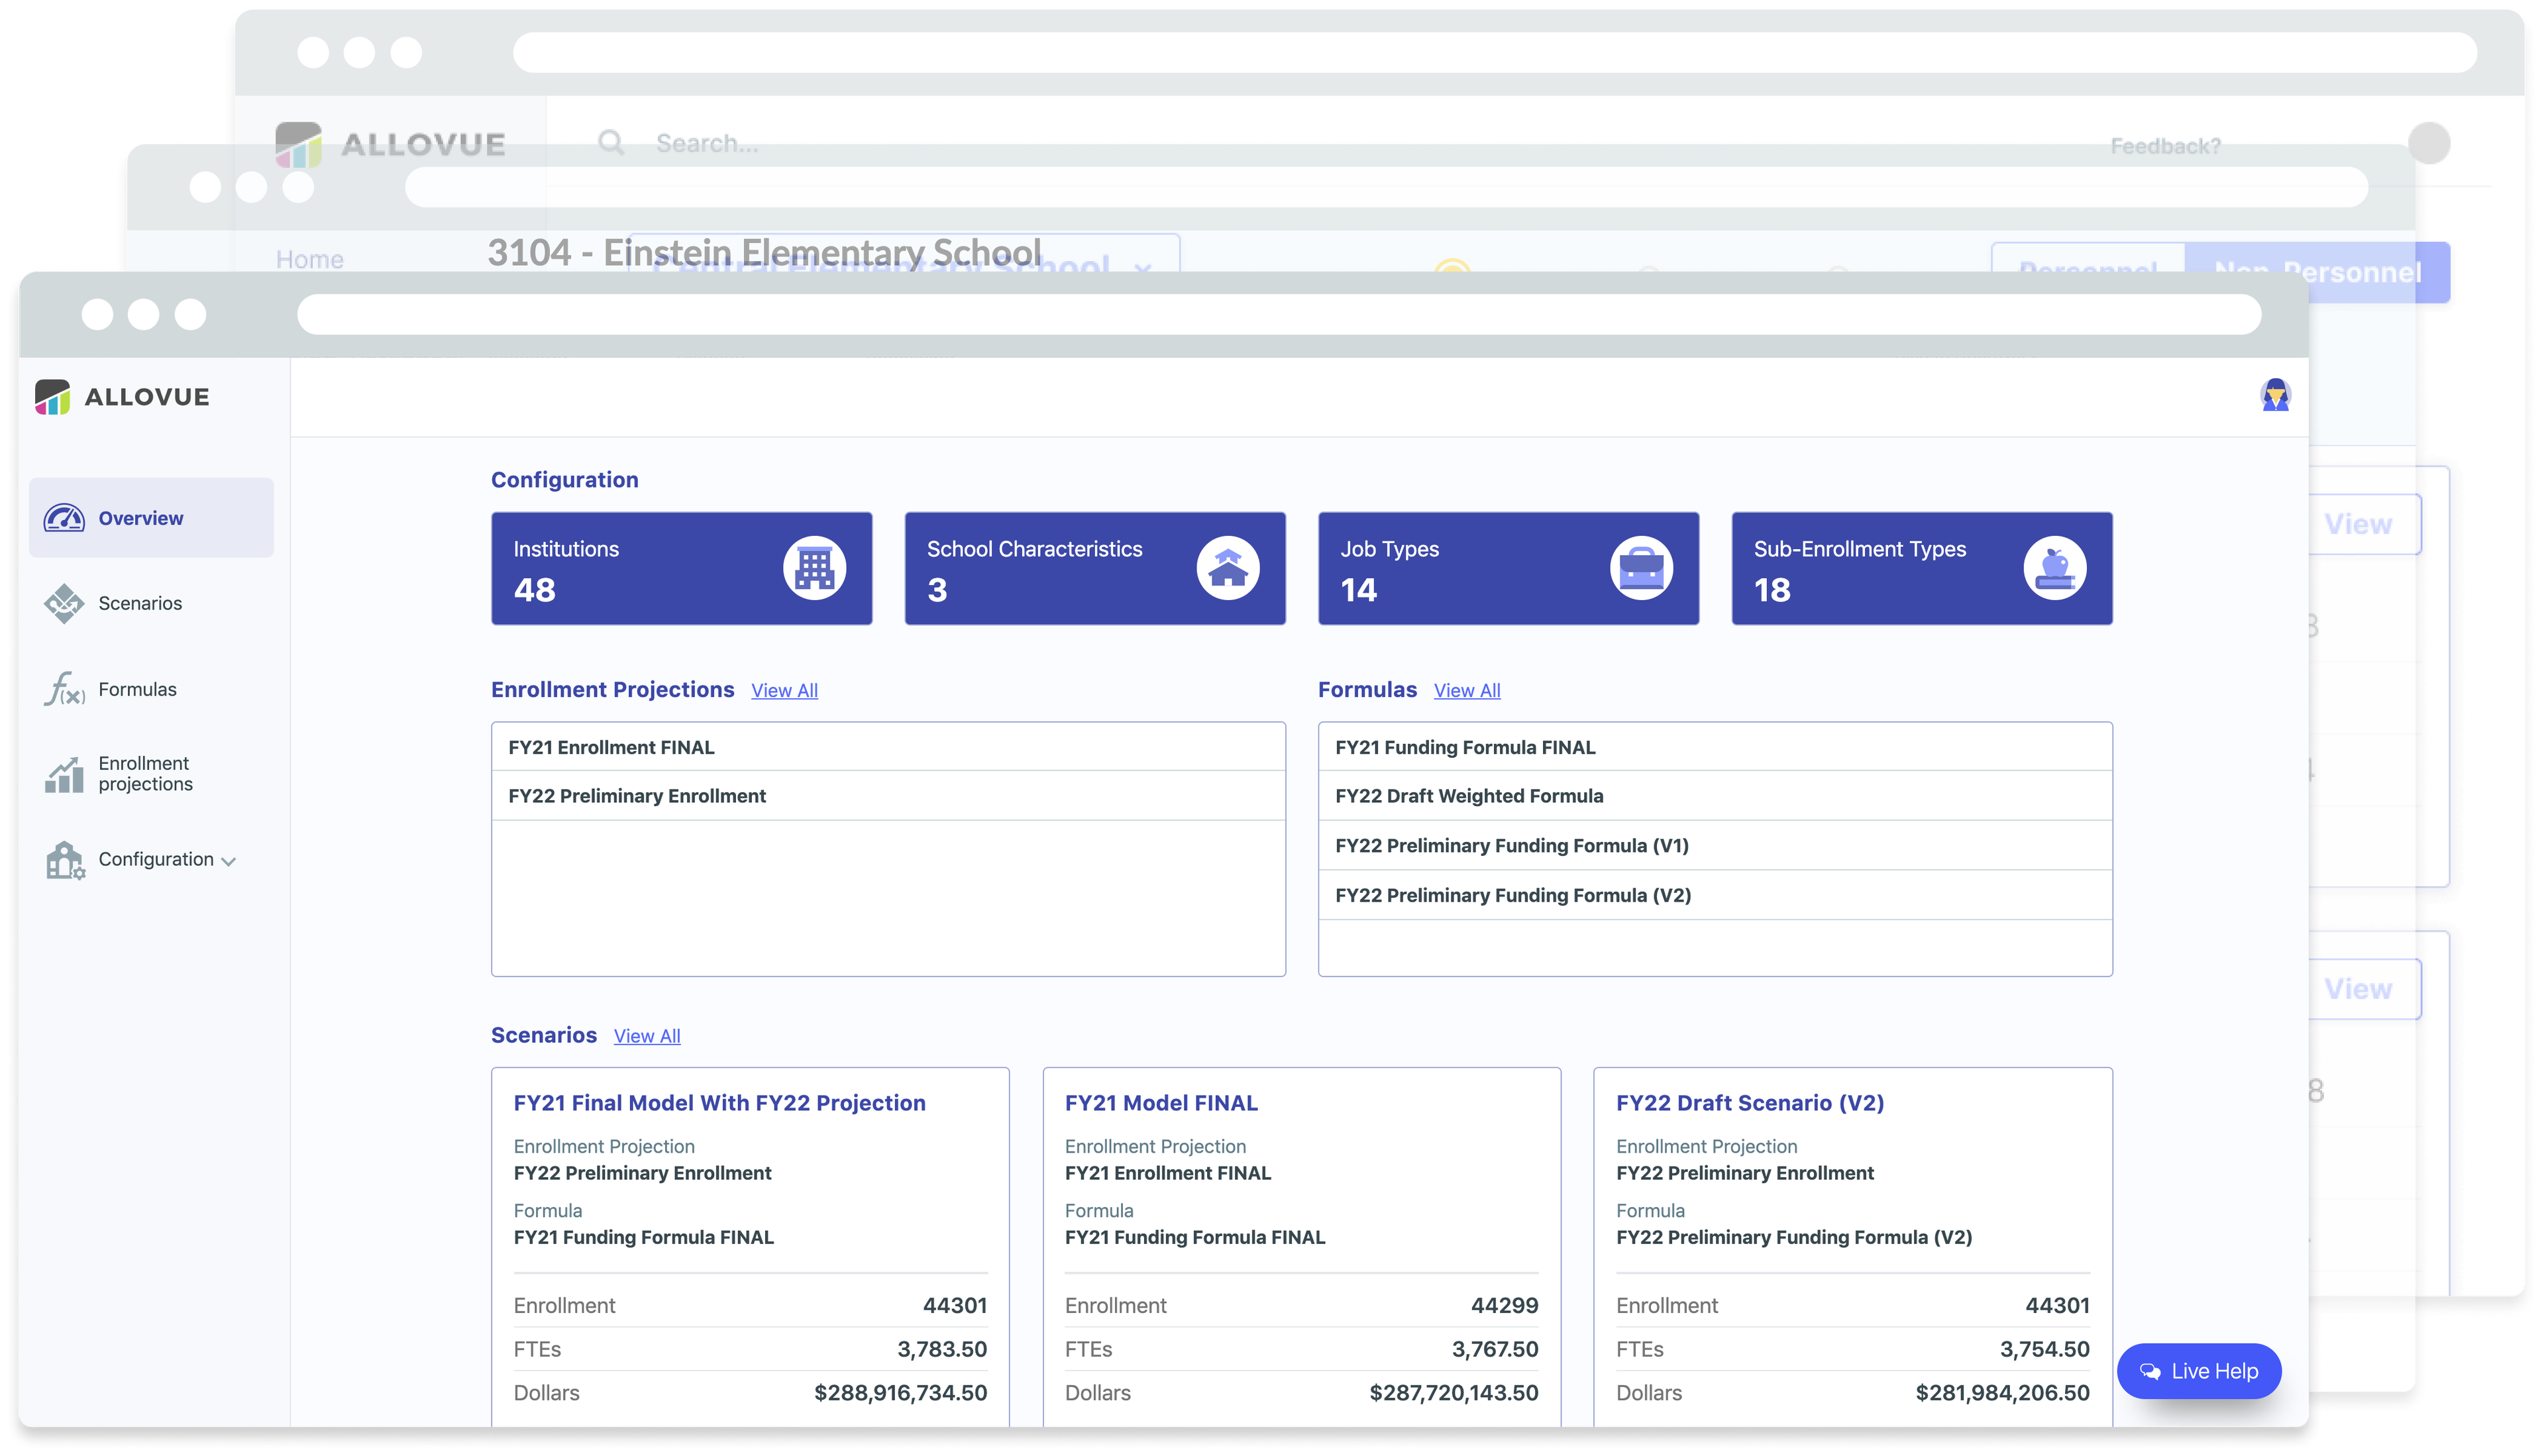 Screenshots of an Allovue web app on the overview page indicating a school district's number of institutions, school characacteristics, job types, sub-enrollment types as well as a section below for enrollment projections, formulas, and scenarios. The indication is that this allows a school district to manage their institutions budgets.